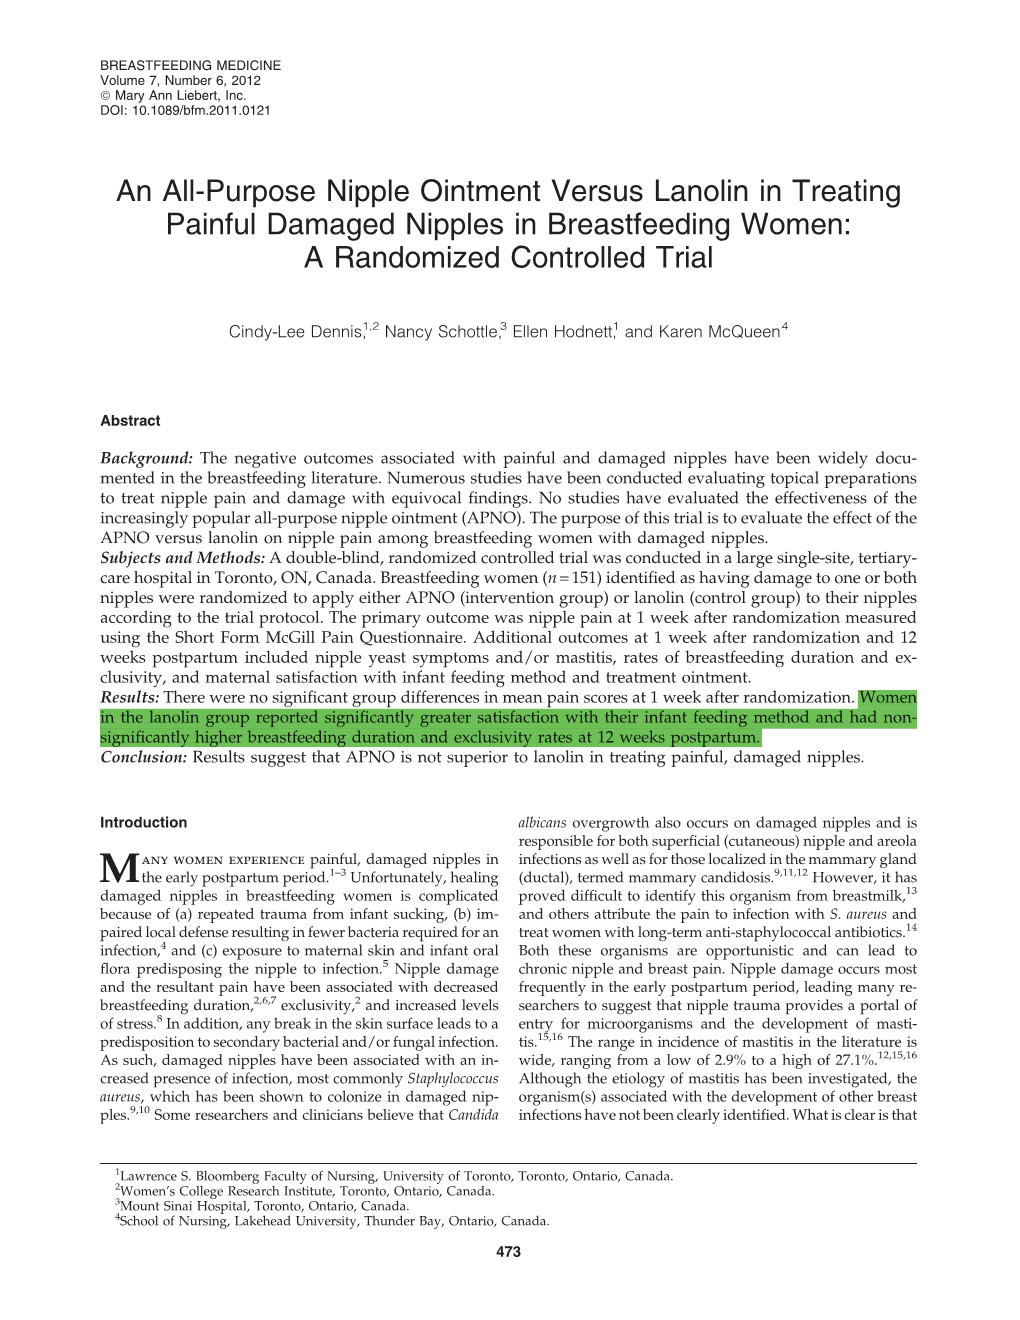 An All-Purpose Nipple Ointment Versus Lanolin in Treating Painful Damaged Nipples in Breastfeeding Women: a Randomized Controlled Trial